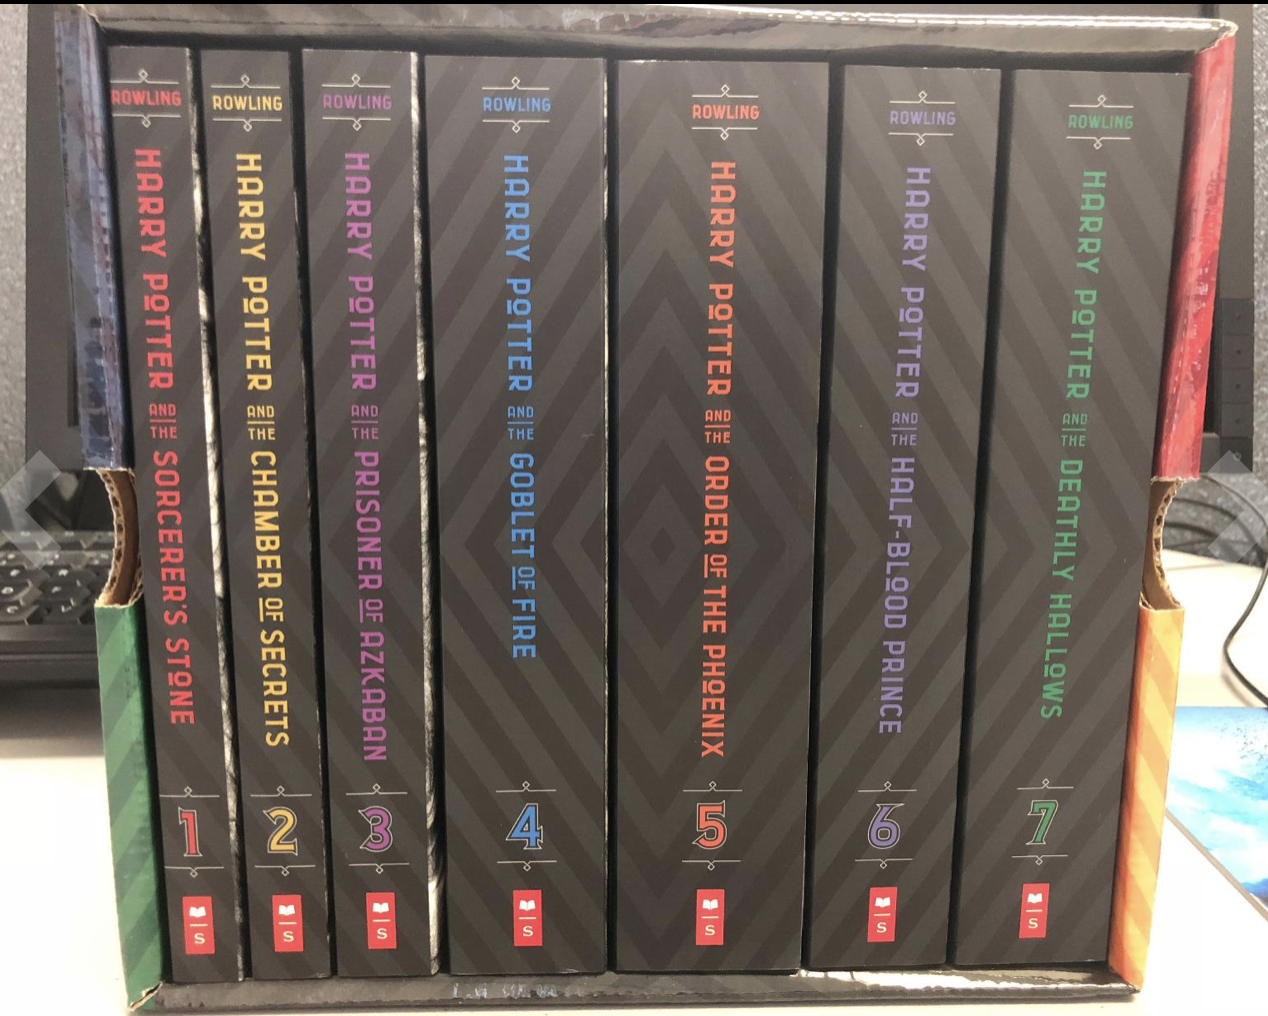 harry potter book set special edition